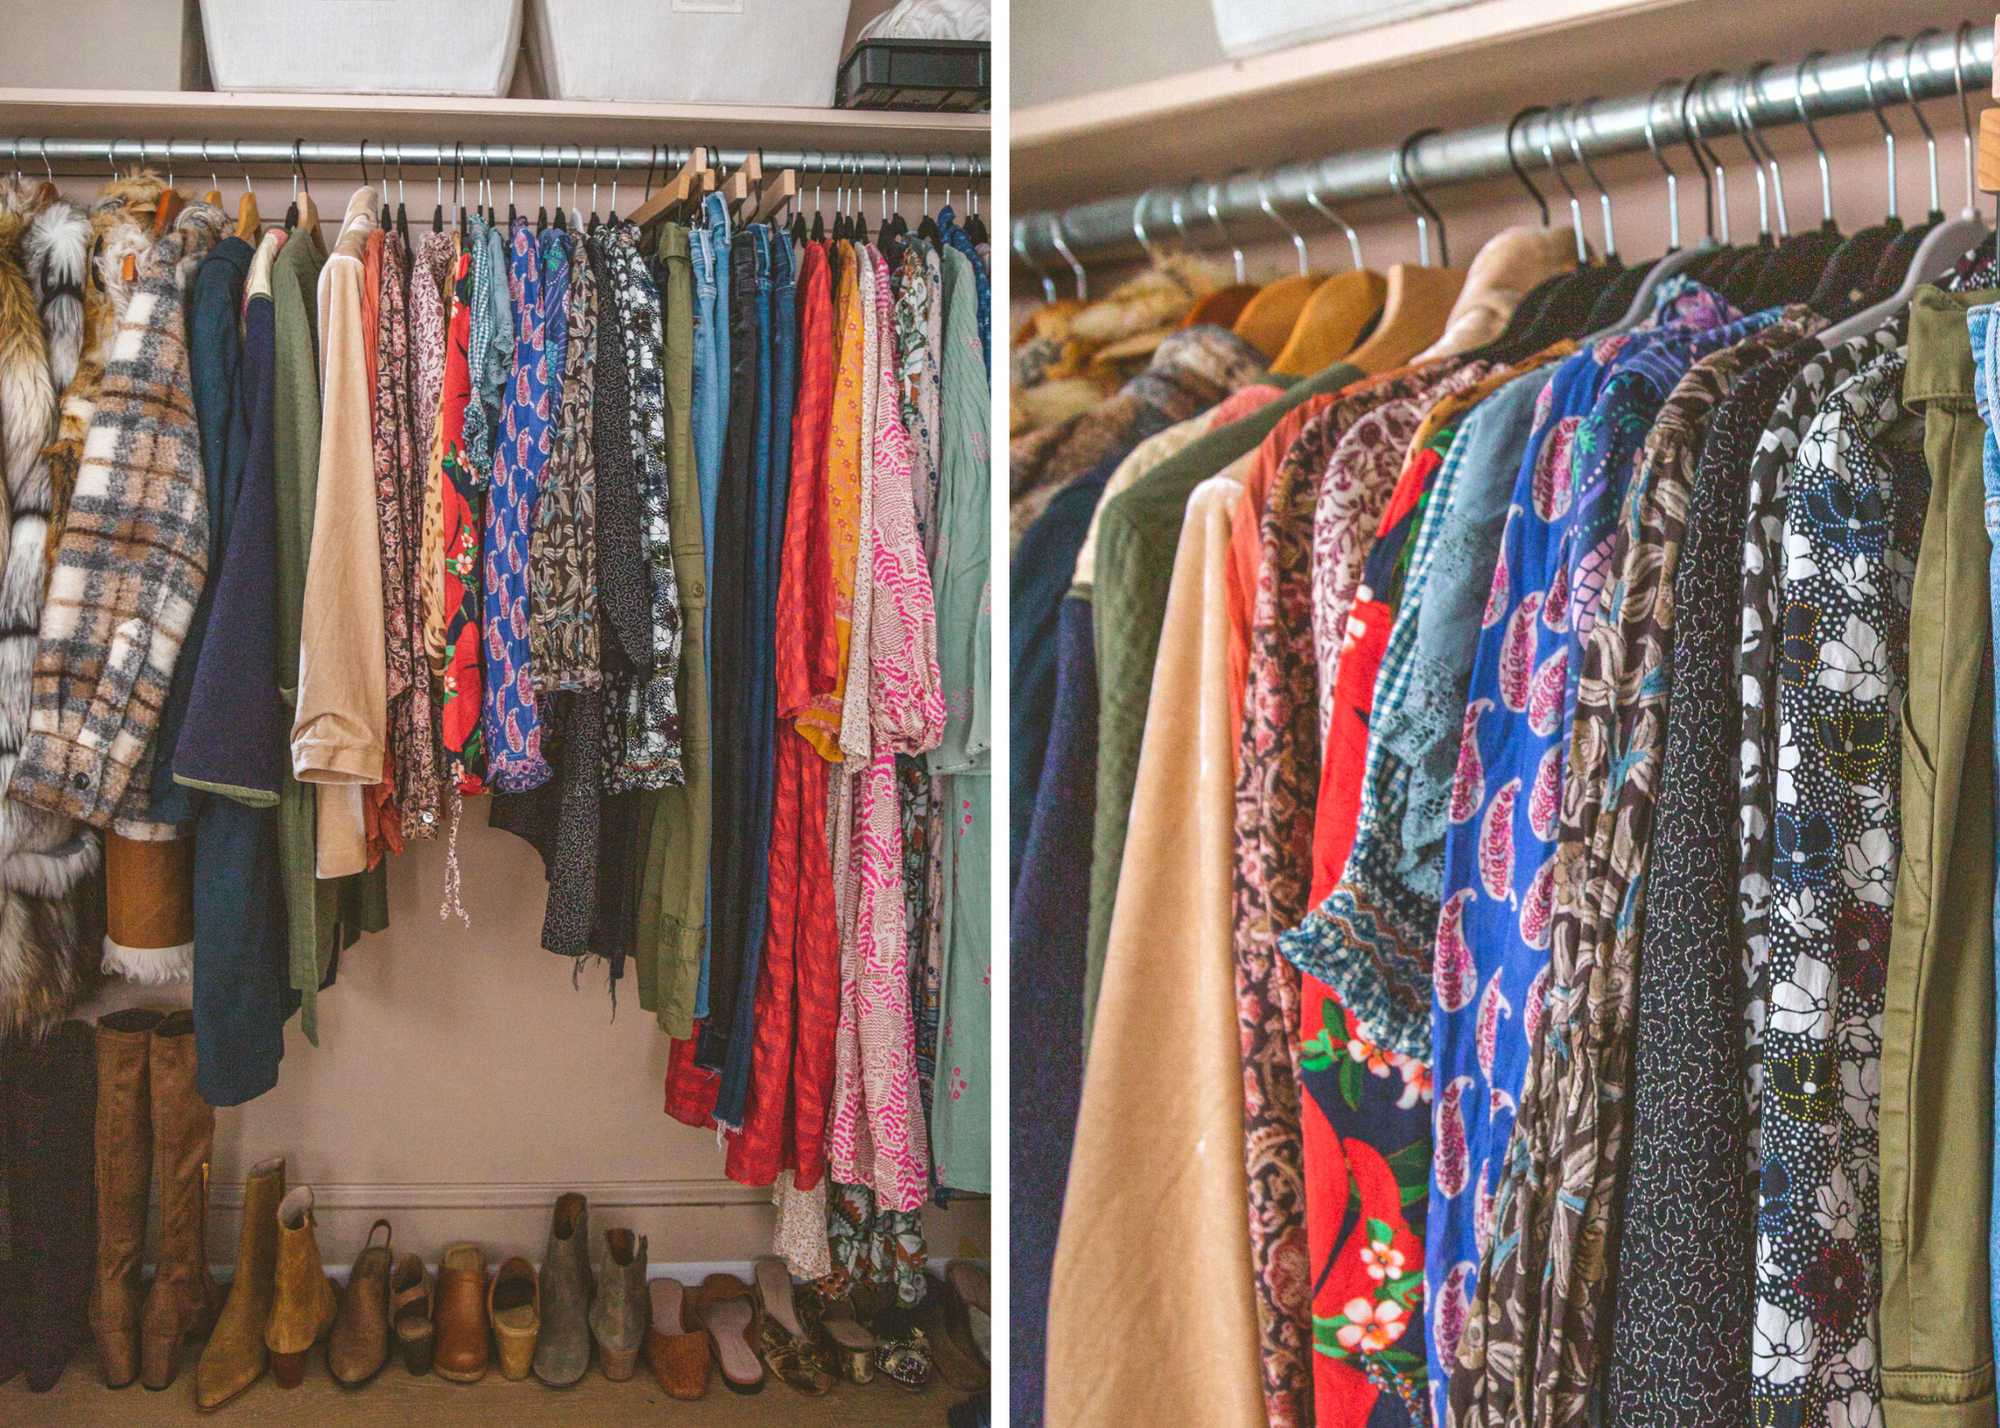 How to Make the Most of a Small Closet